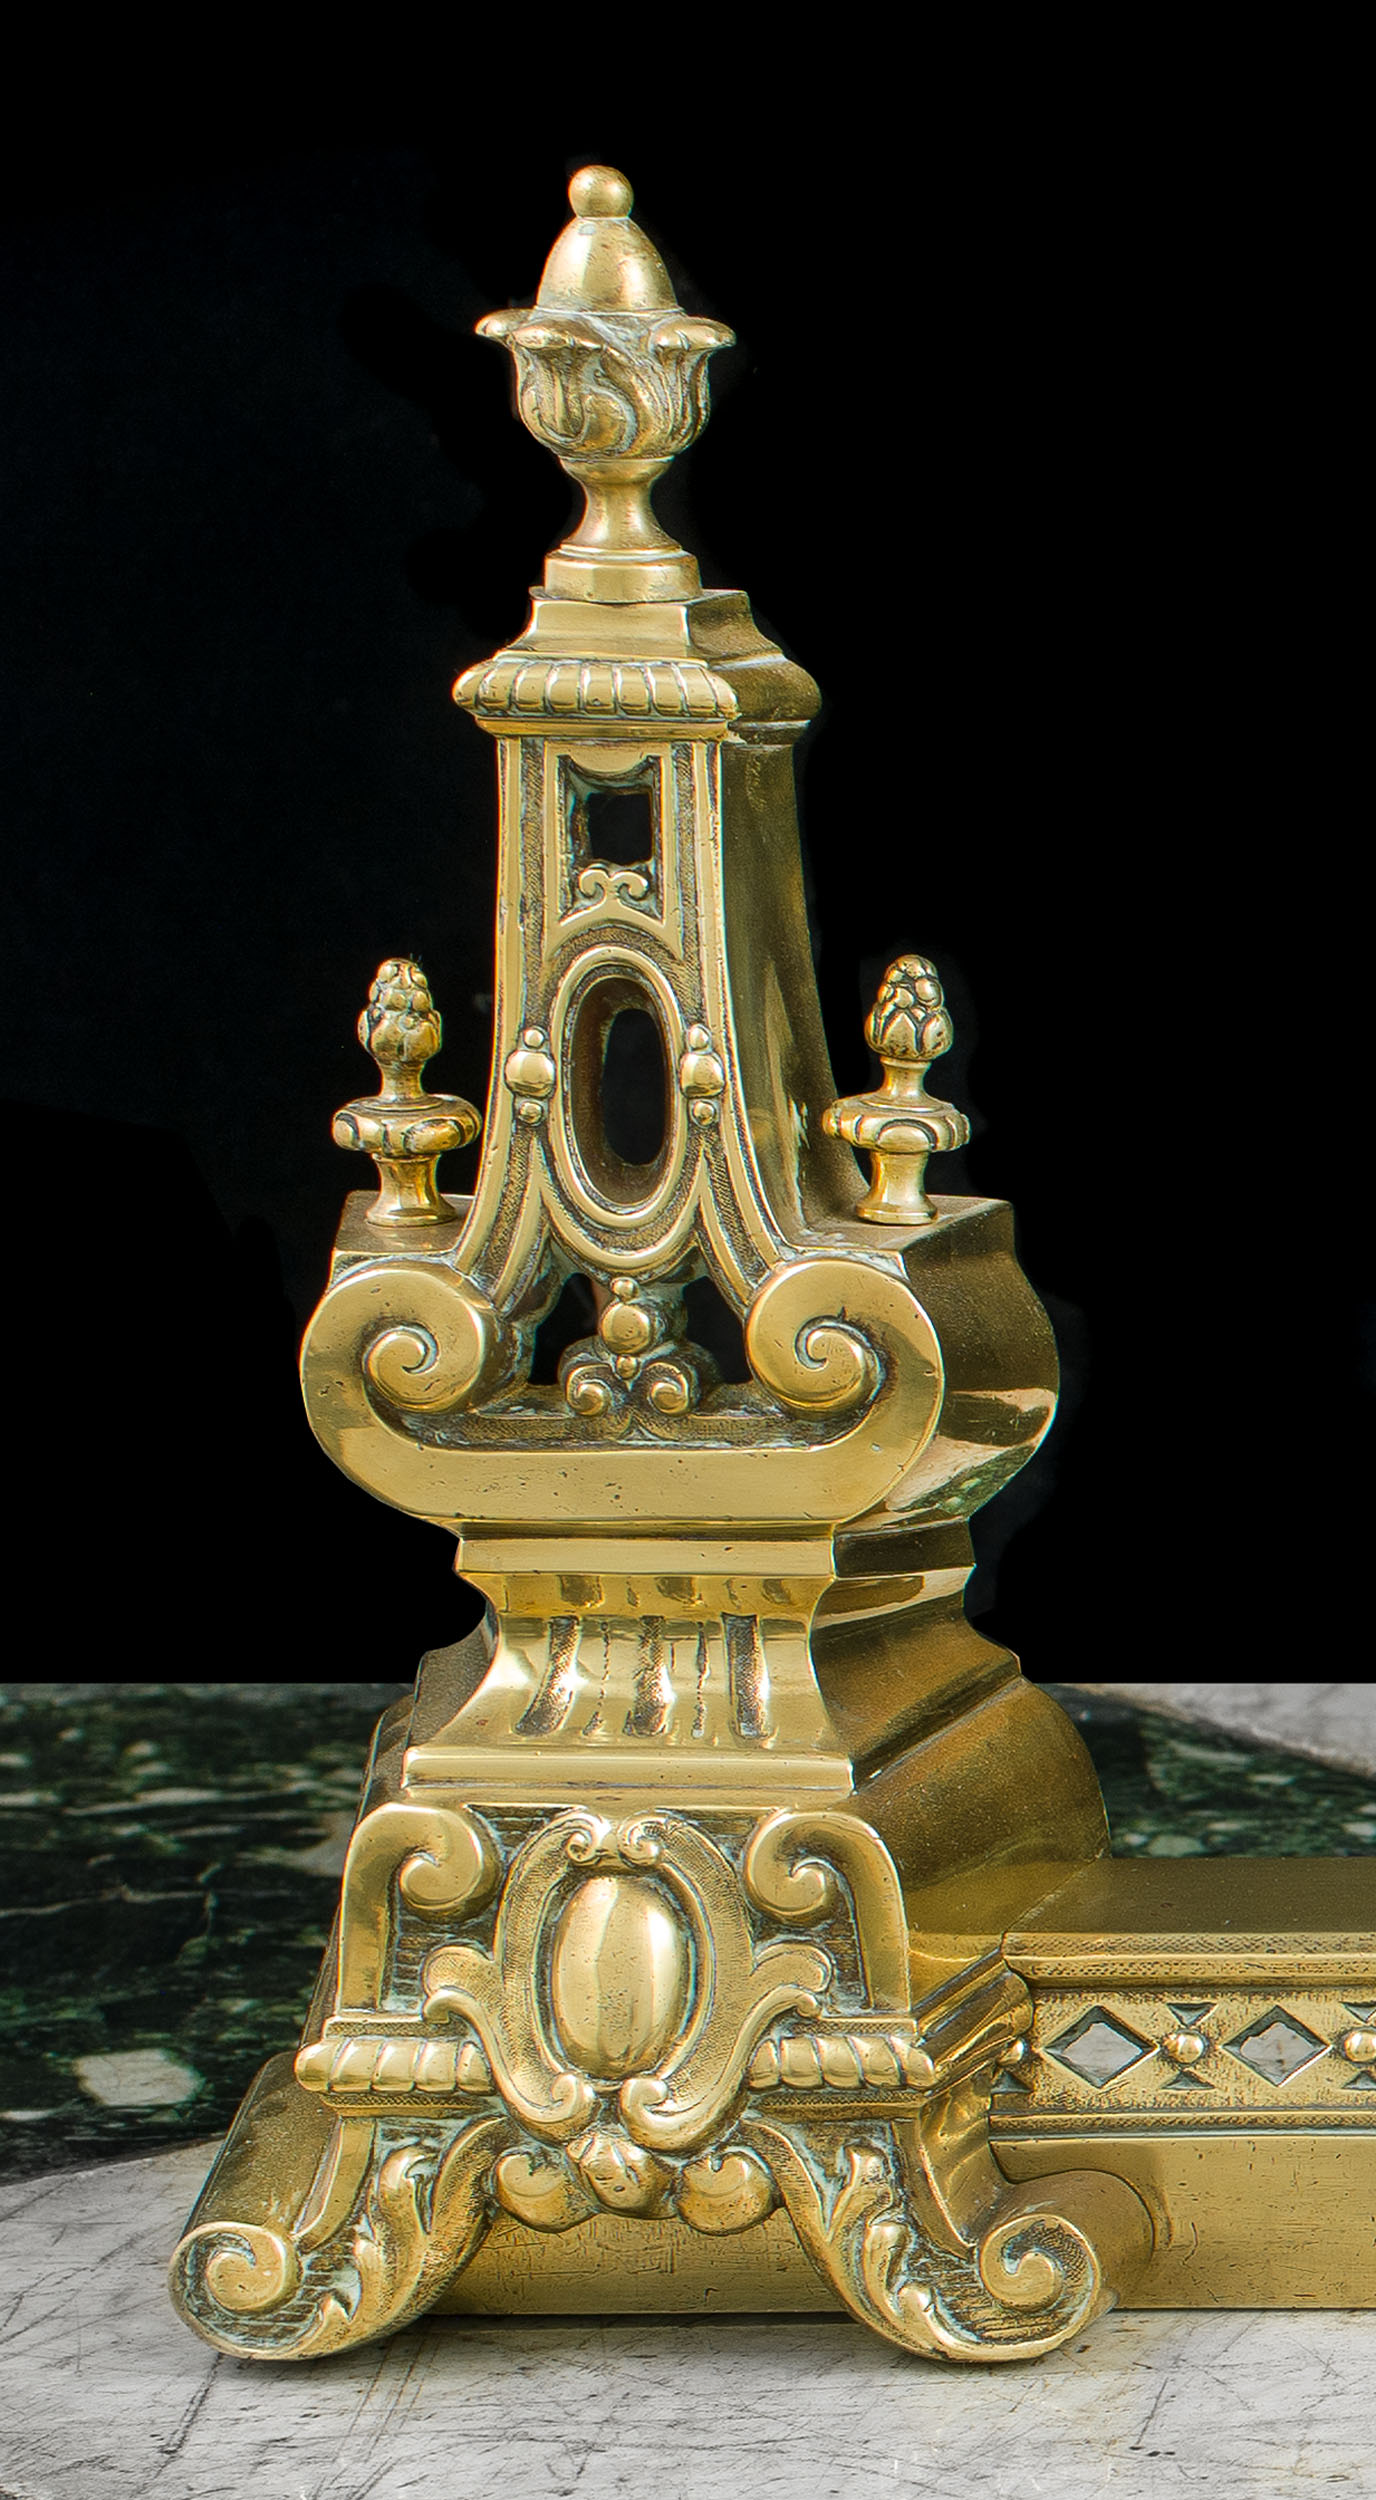  An Ornate Antique French Brass Fender 